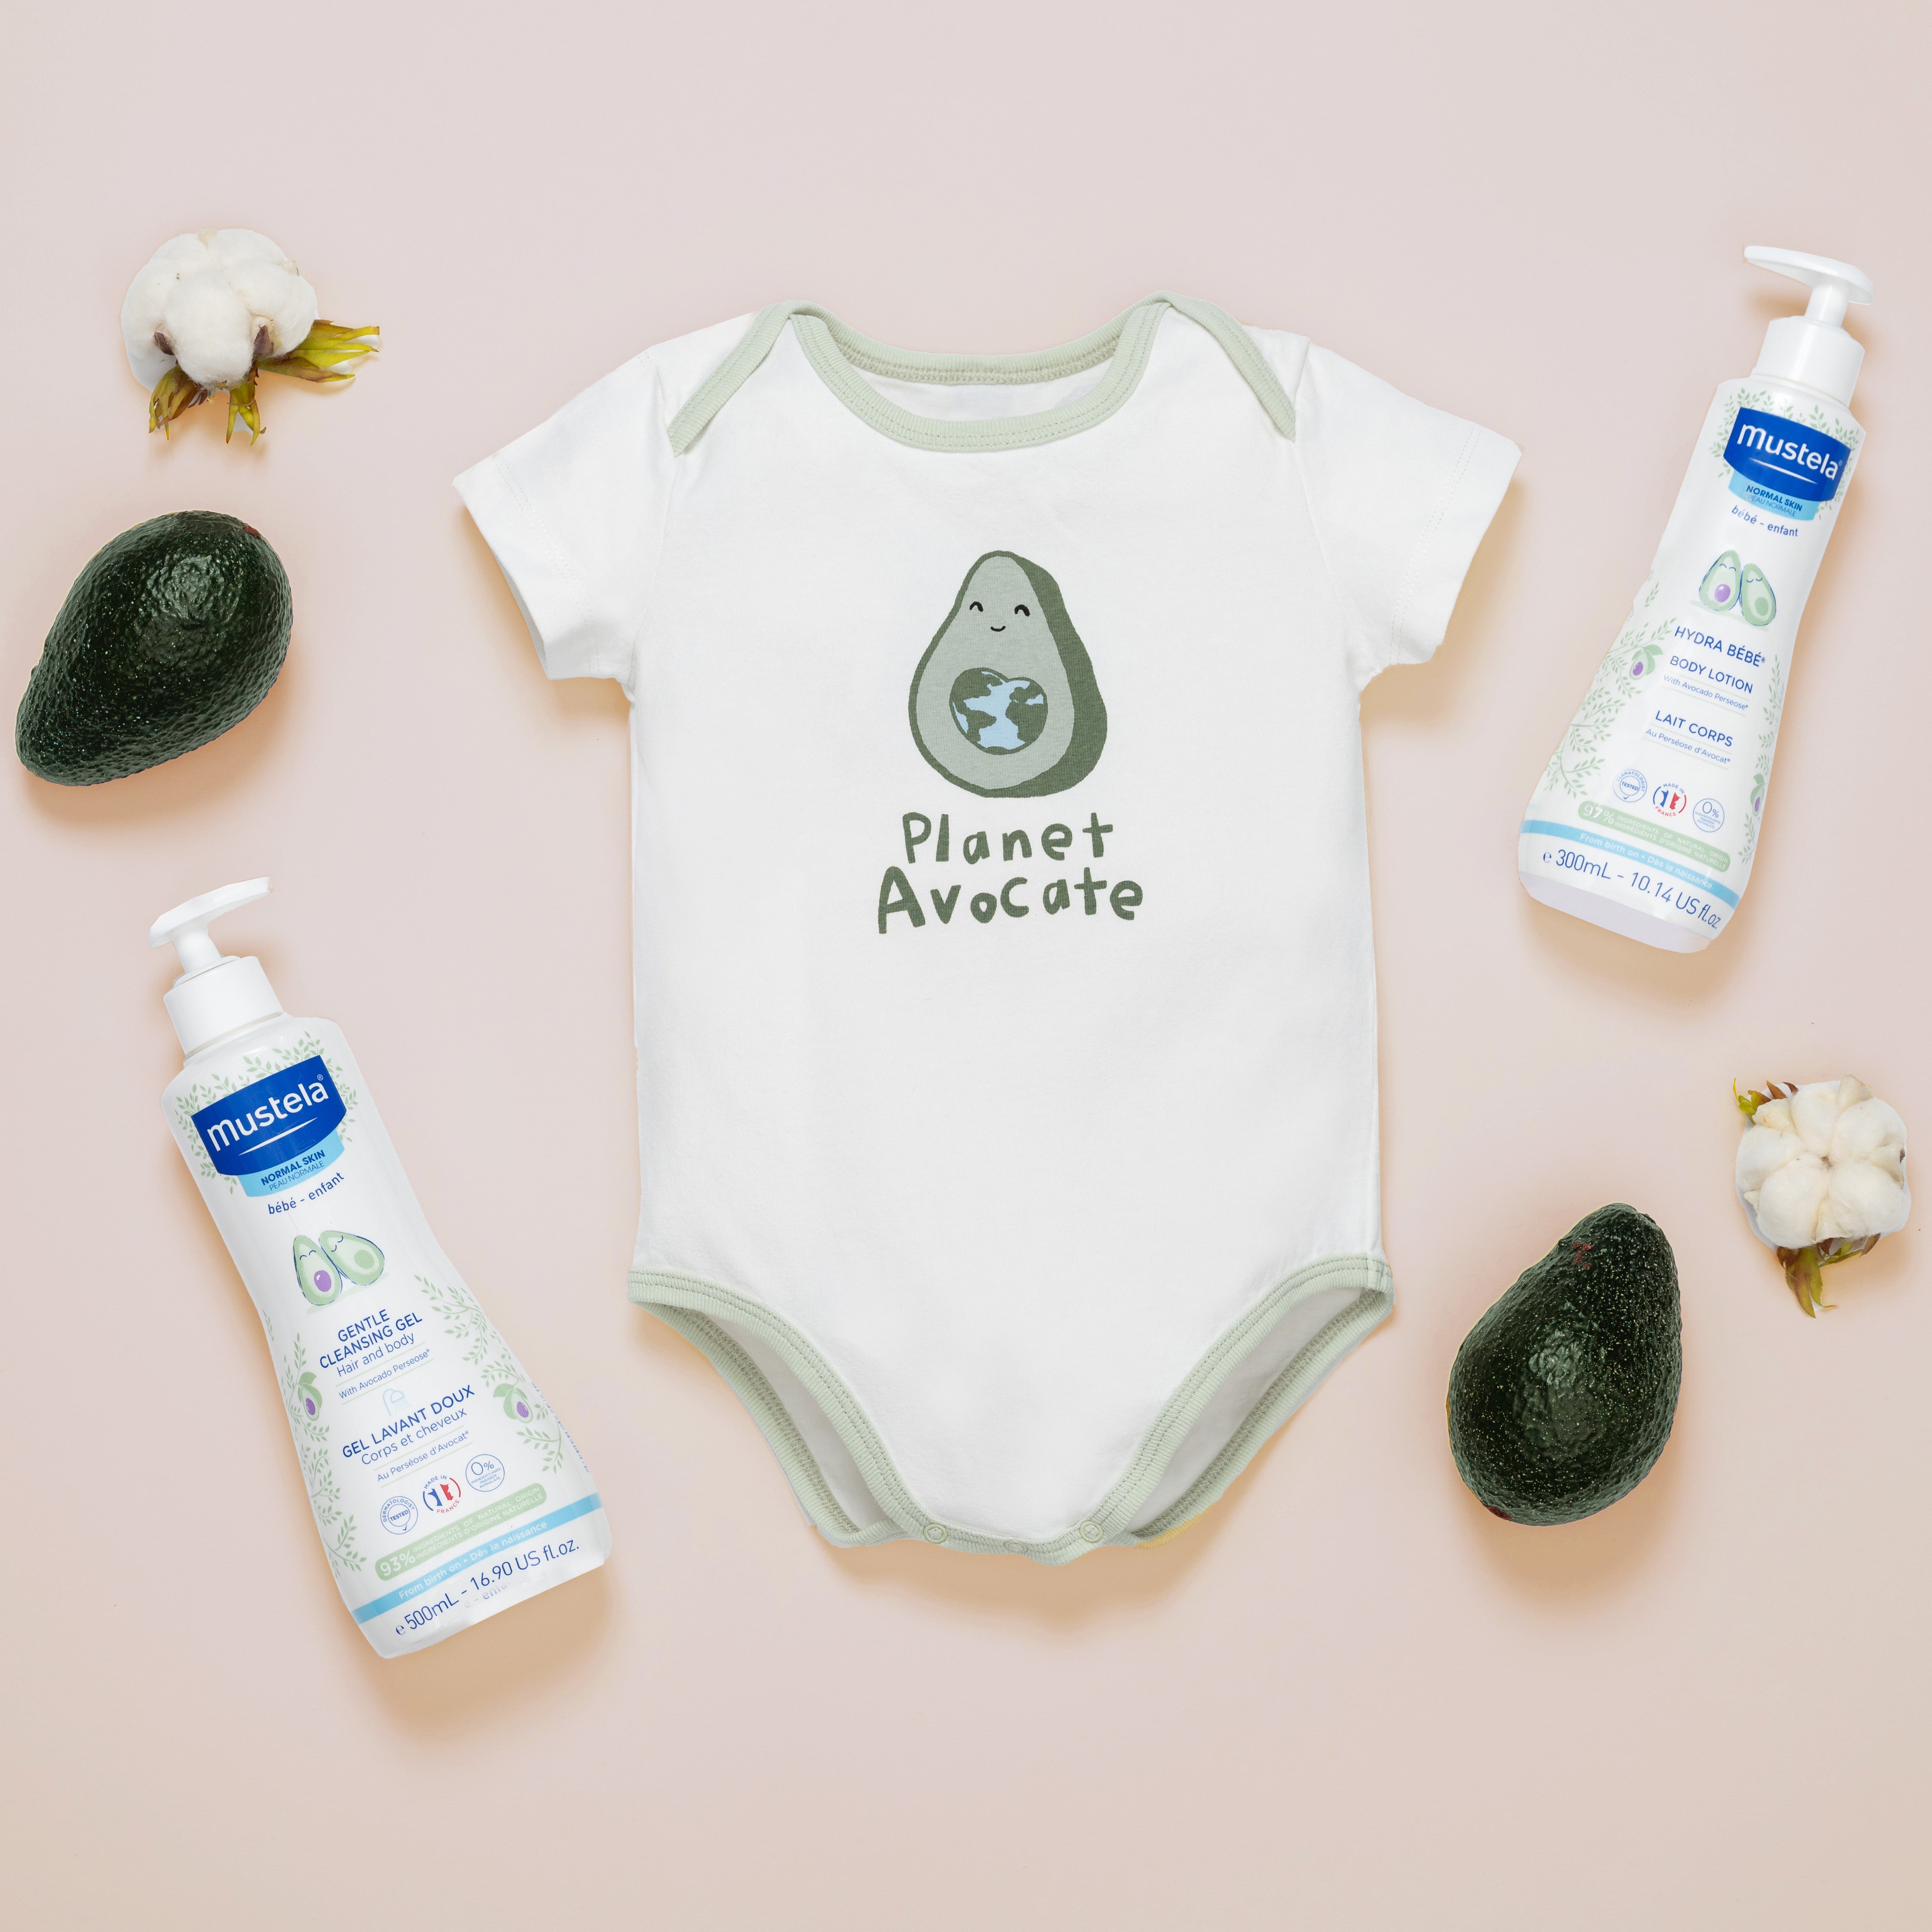 Limited Edition Planet Avocate Bundle